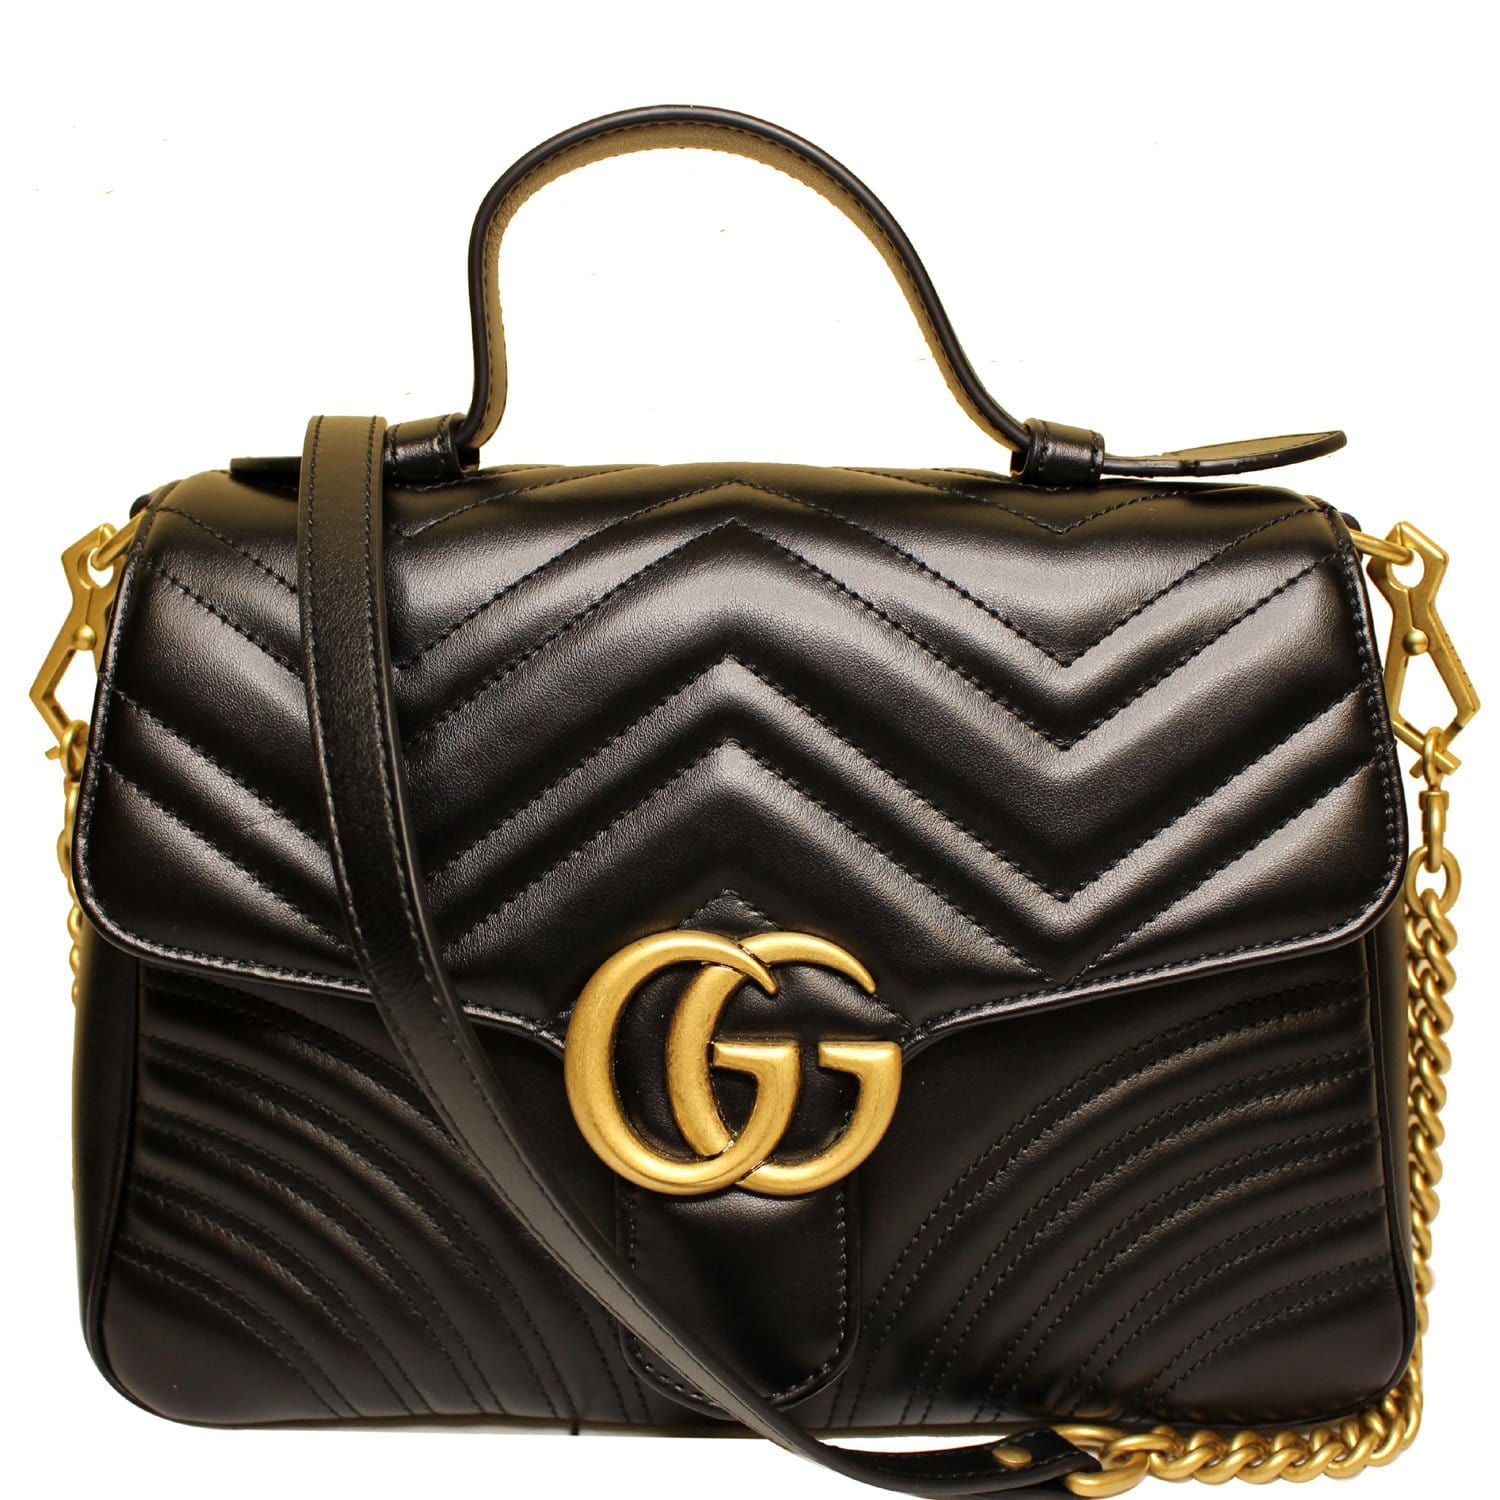 Which Gucci Marmont Bag Is Popular? Buying Advice